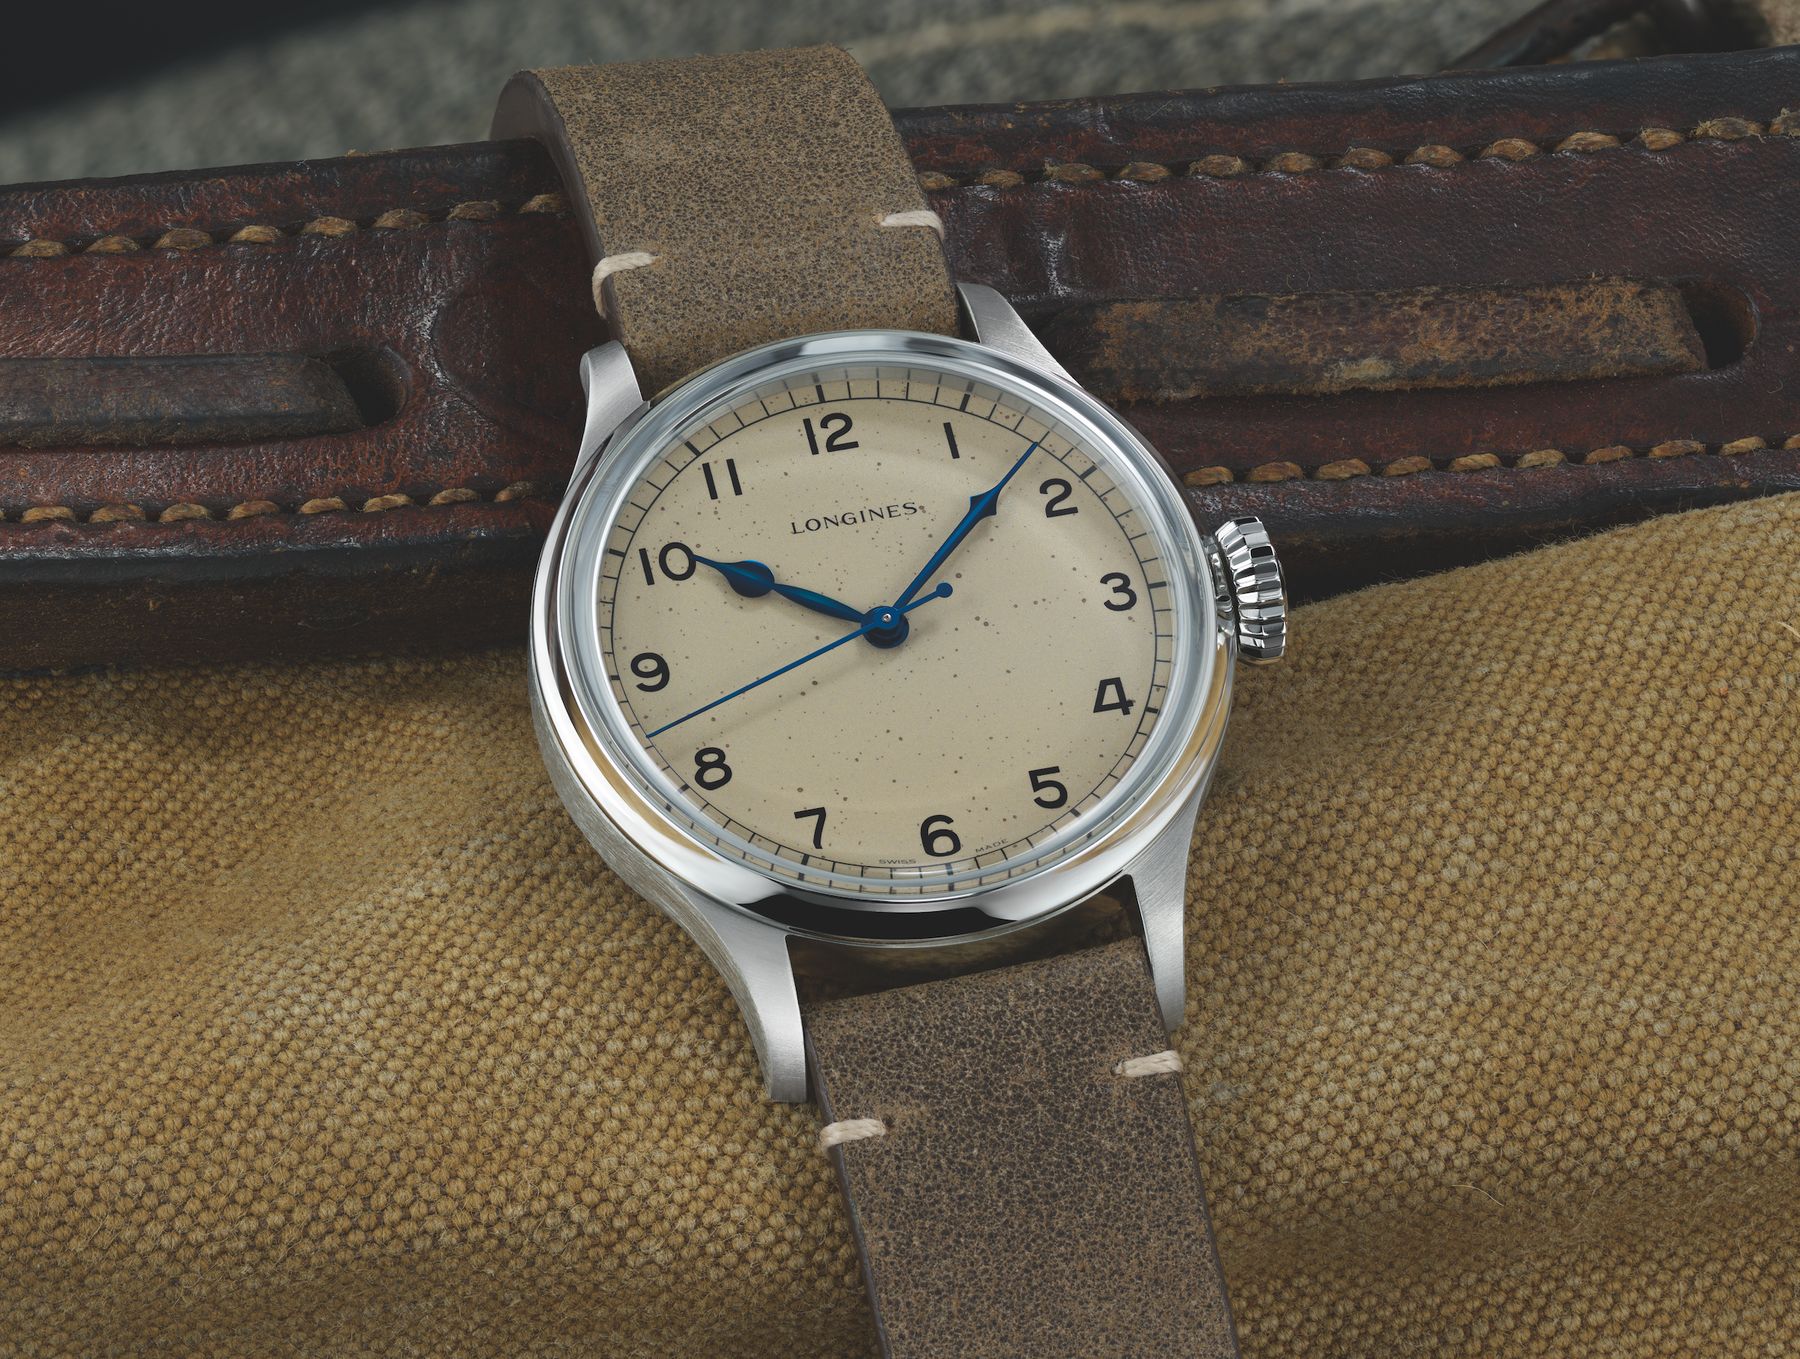 Longines Military Watches Ultimate Buying Guide - Bob's Watches